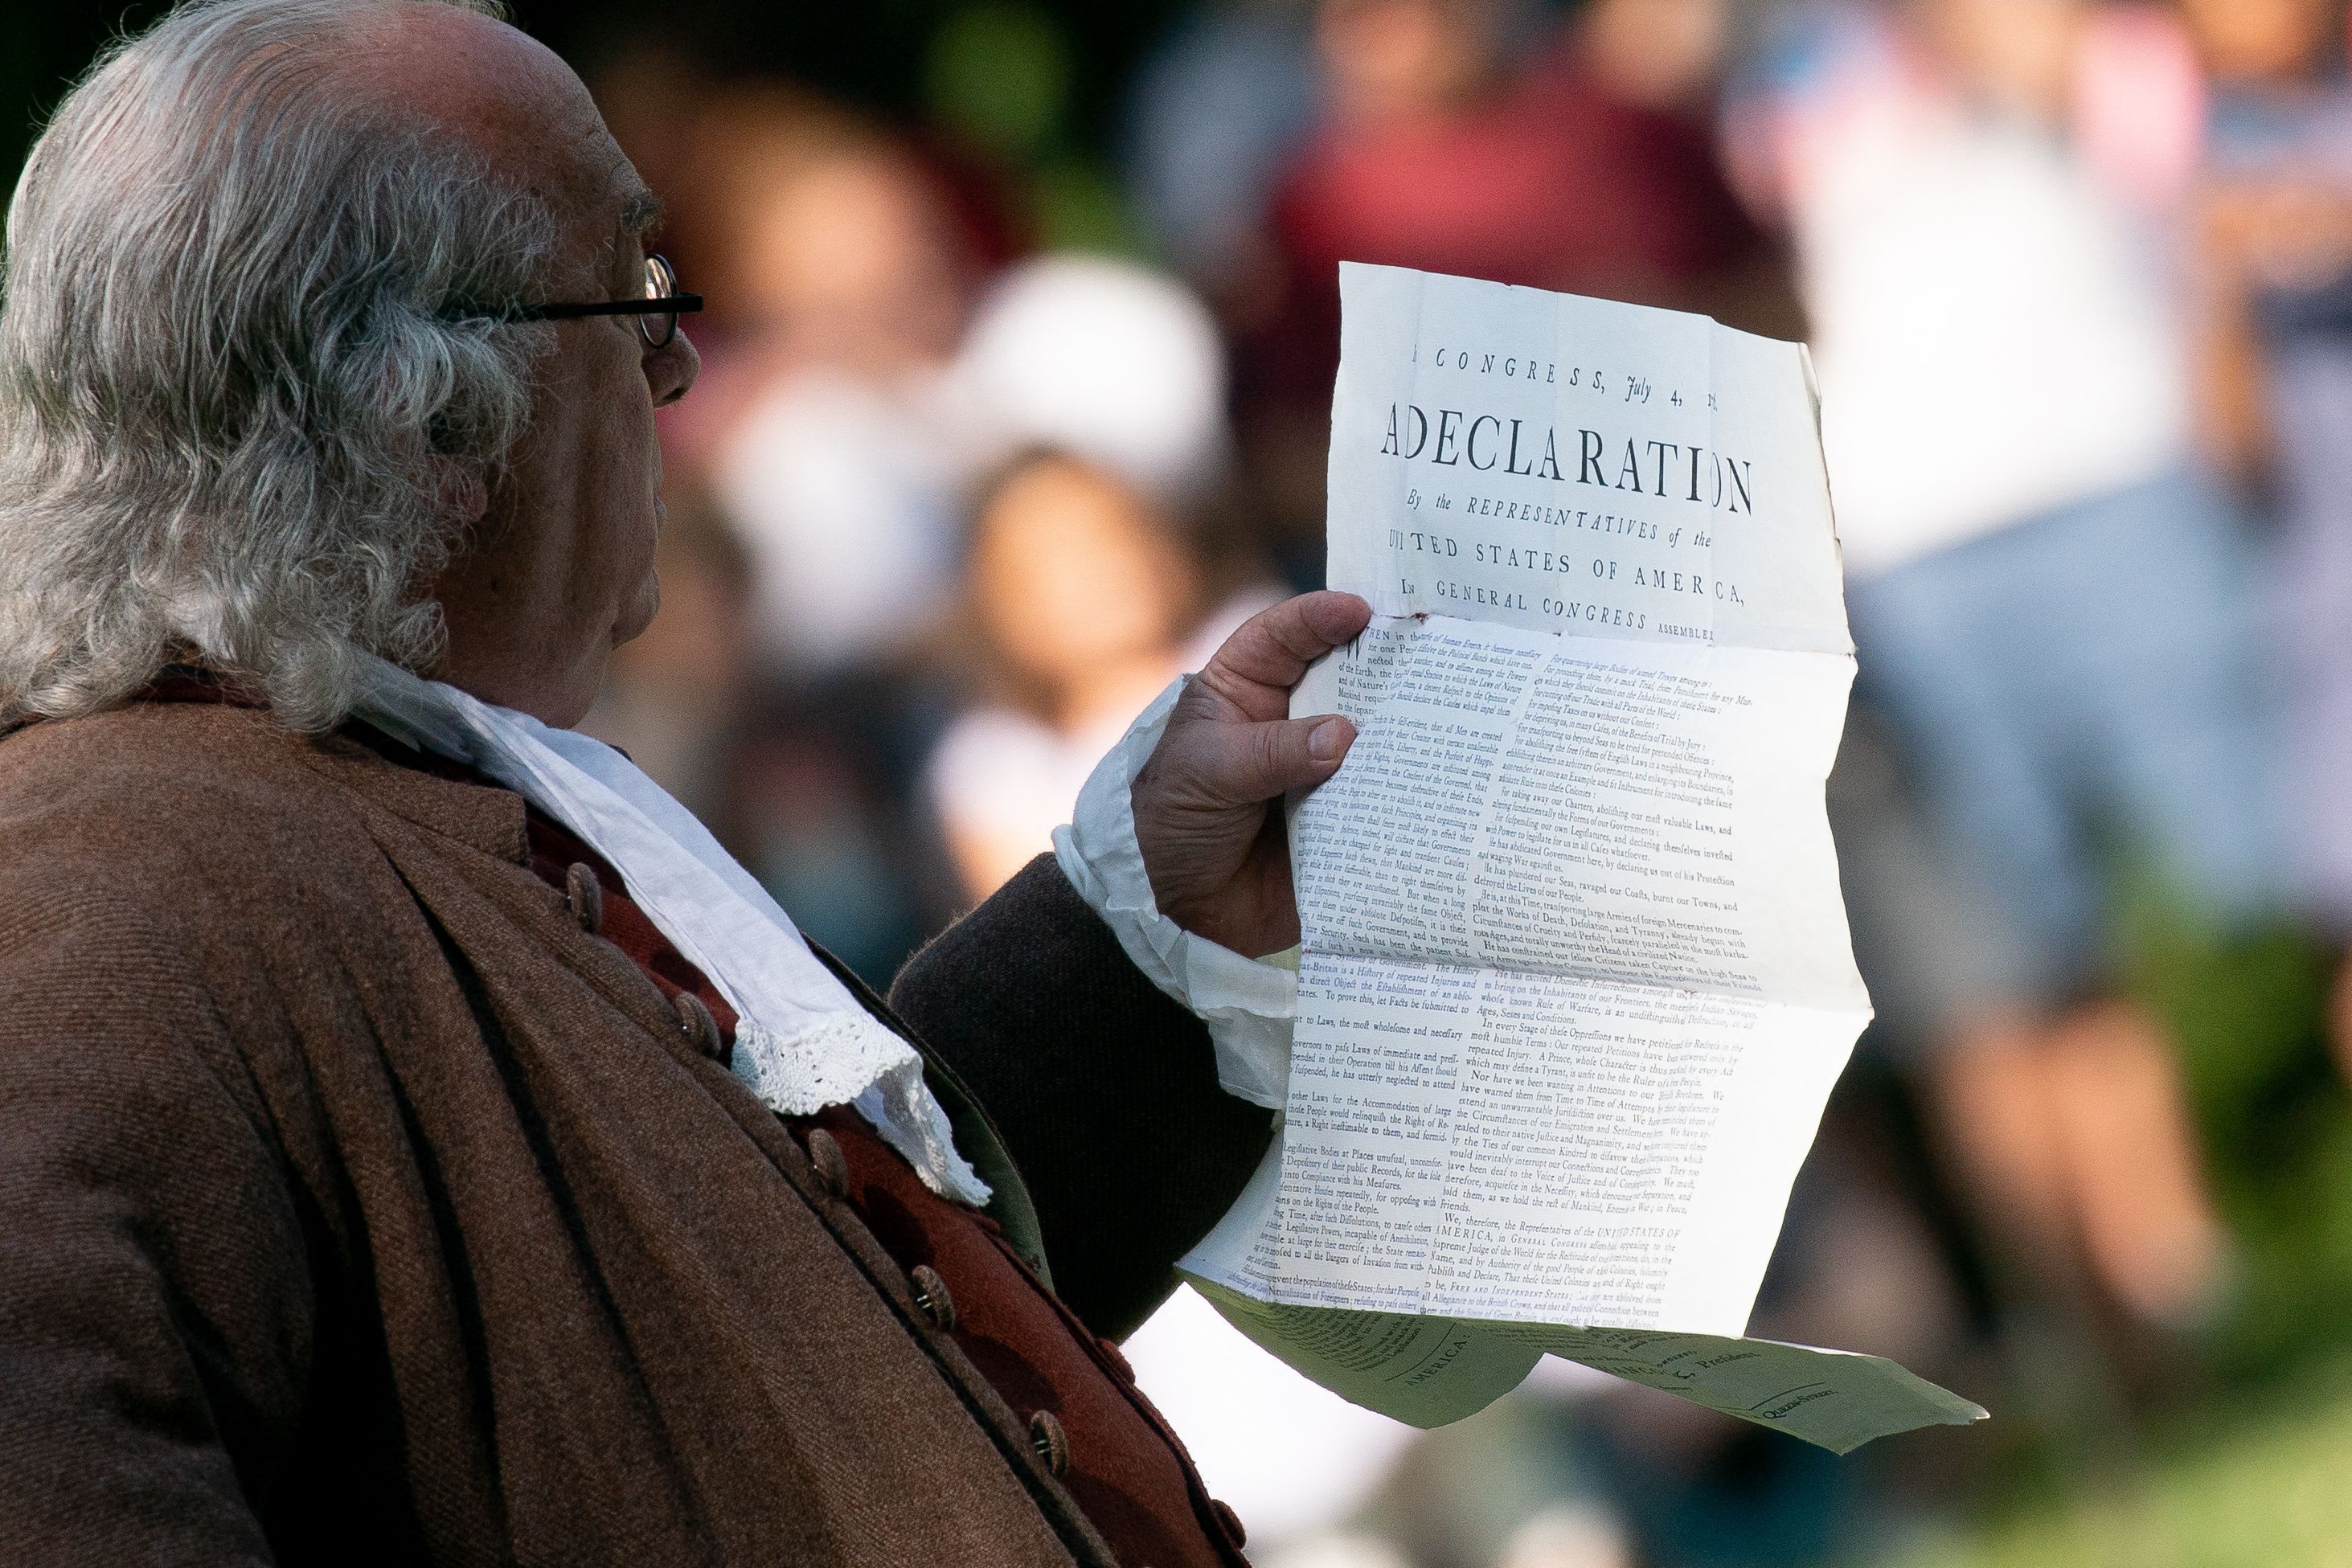 An actor impersonating Benjamin Franklin reads the Declaration of Independence on Independence Day at George Washington's Mount Vernon in Mount Vernon, Virginia, on July 4, 2023.